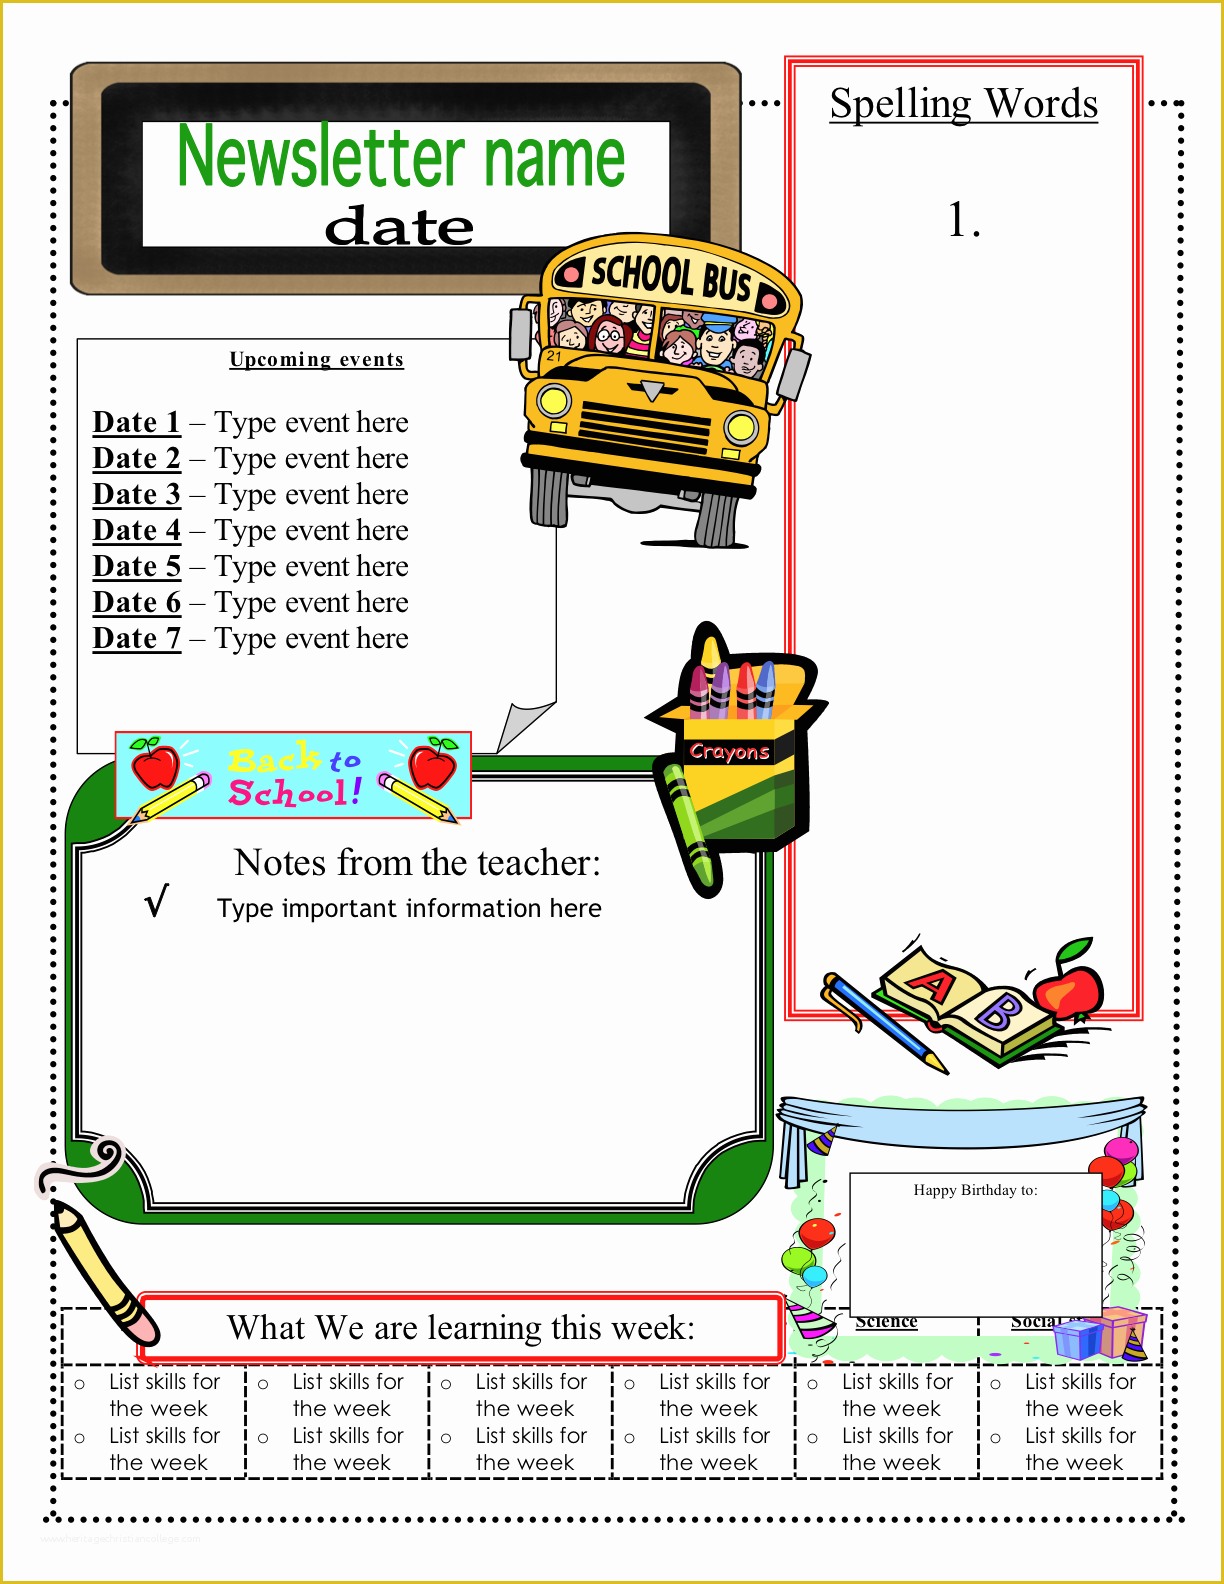 Free School Newsletter Templates Of 3 6 Free Resources June 2012